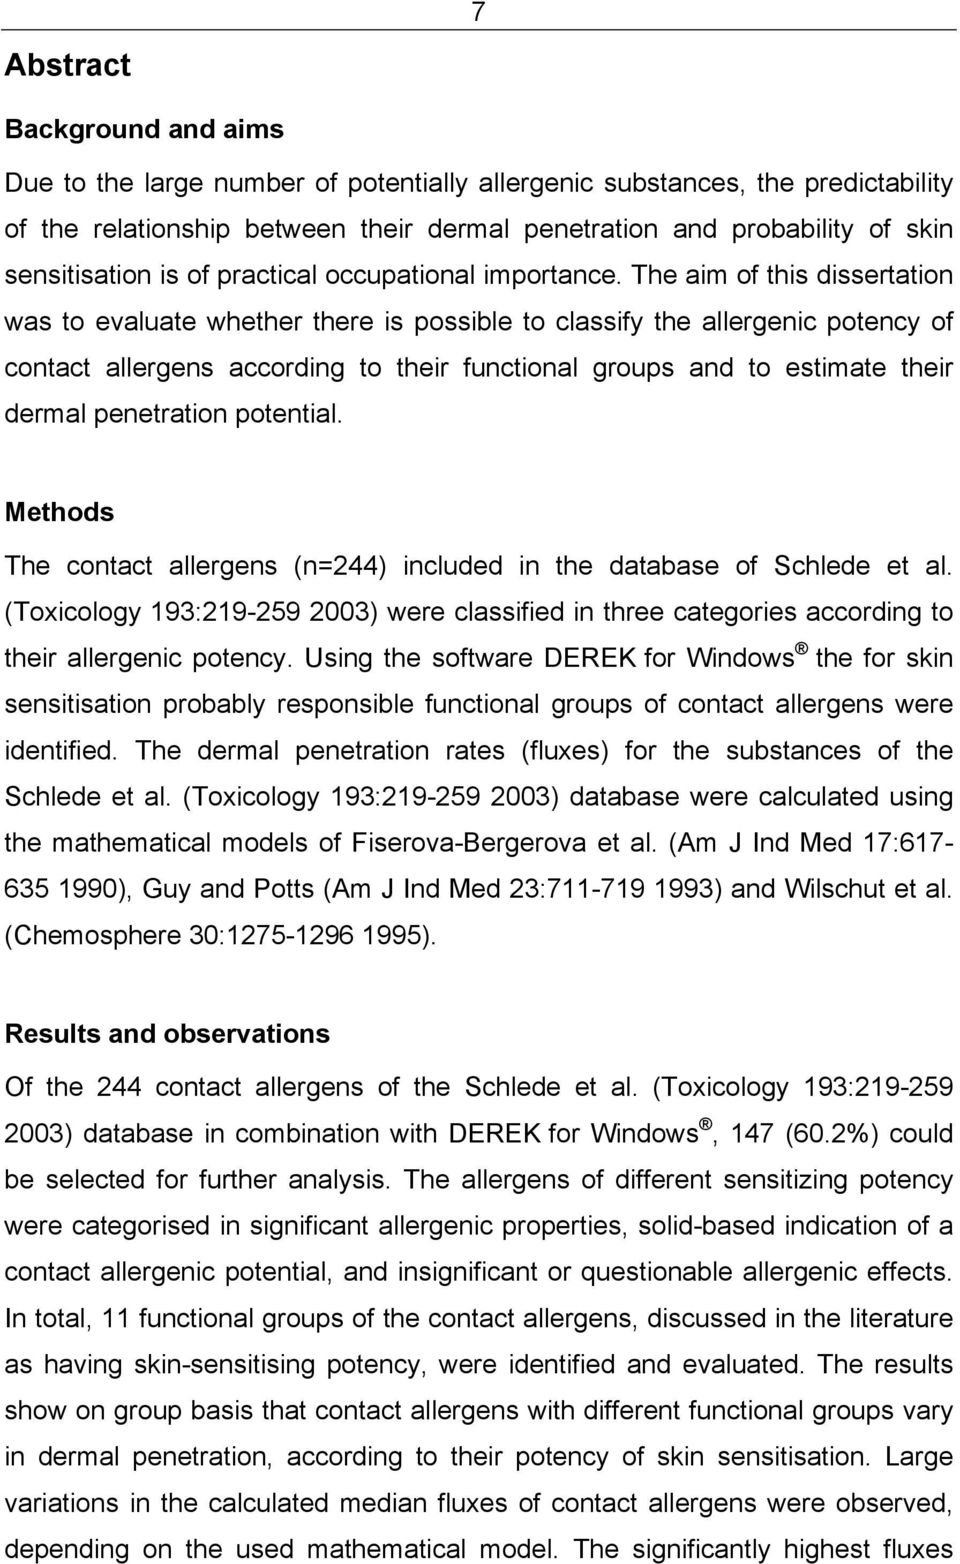 The aim of this dissertation was to evaluate whether there is possible to classify the allergenic potency of contact allergens according to their functional groups and to estimate their dermal